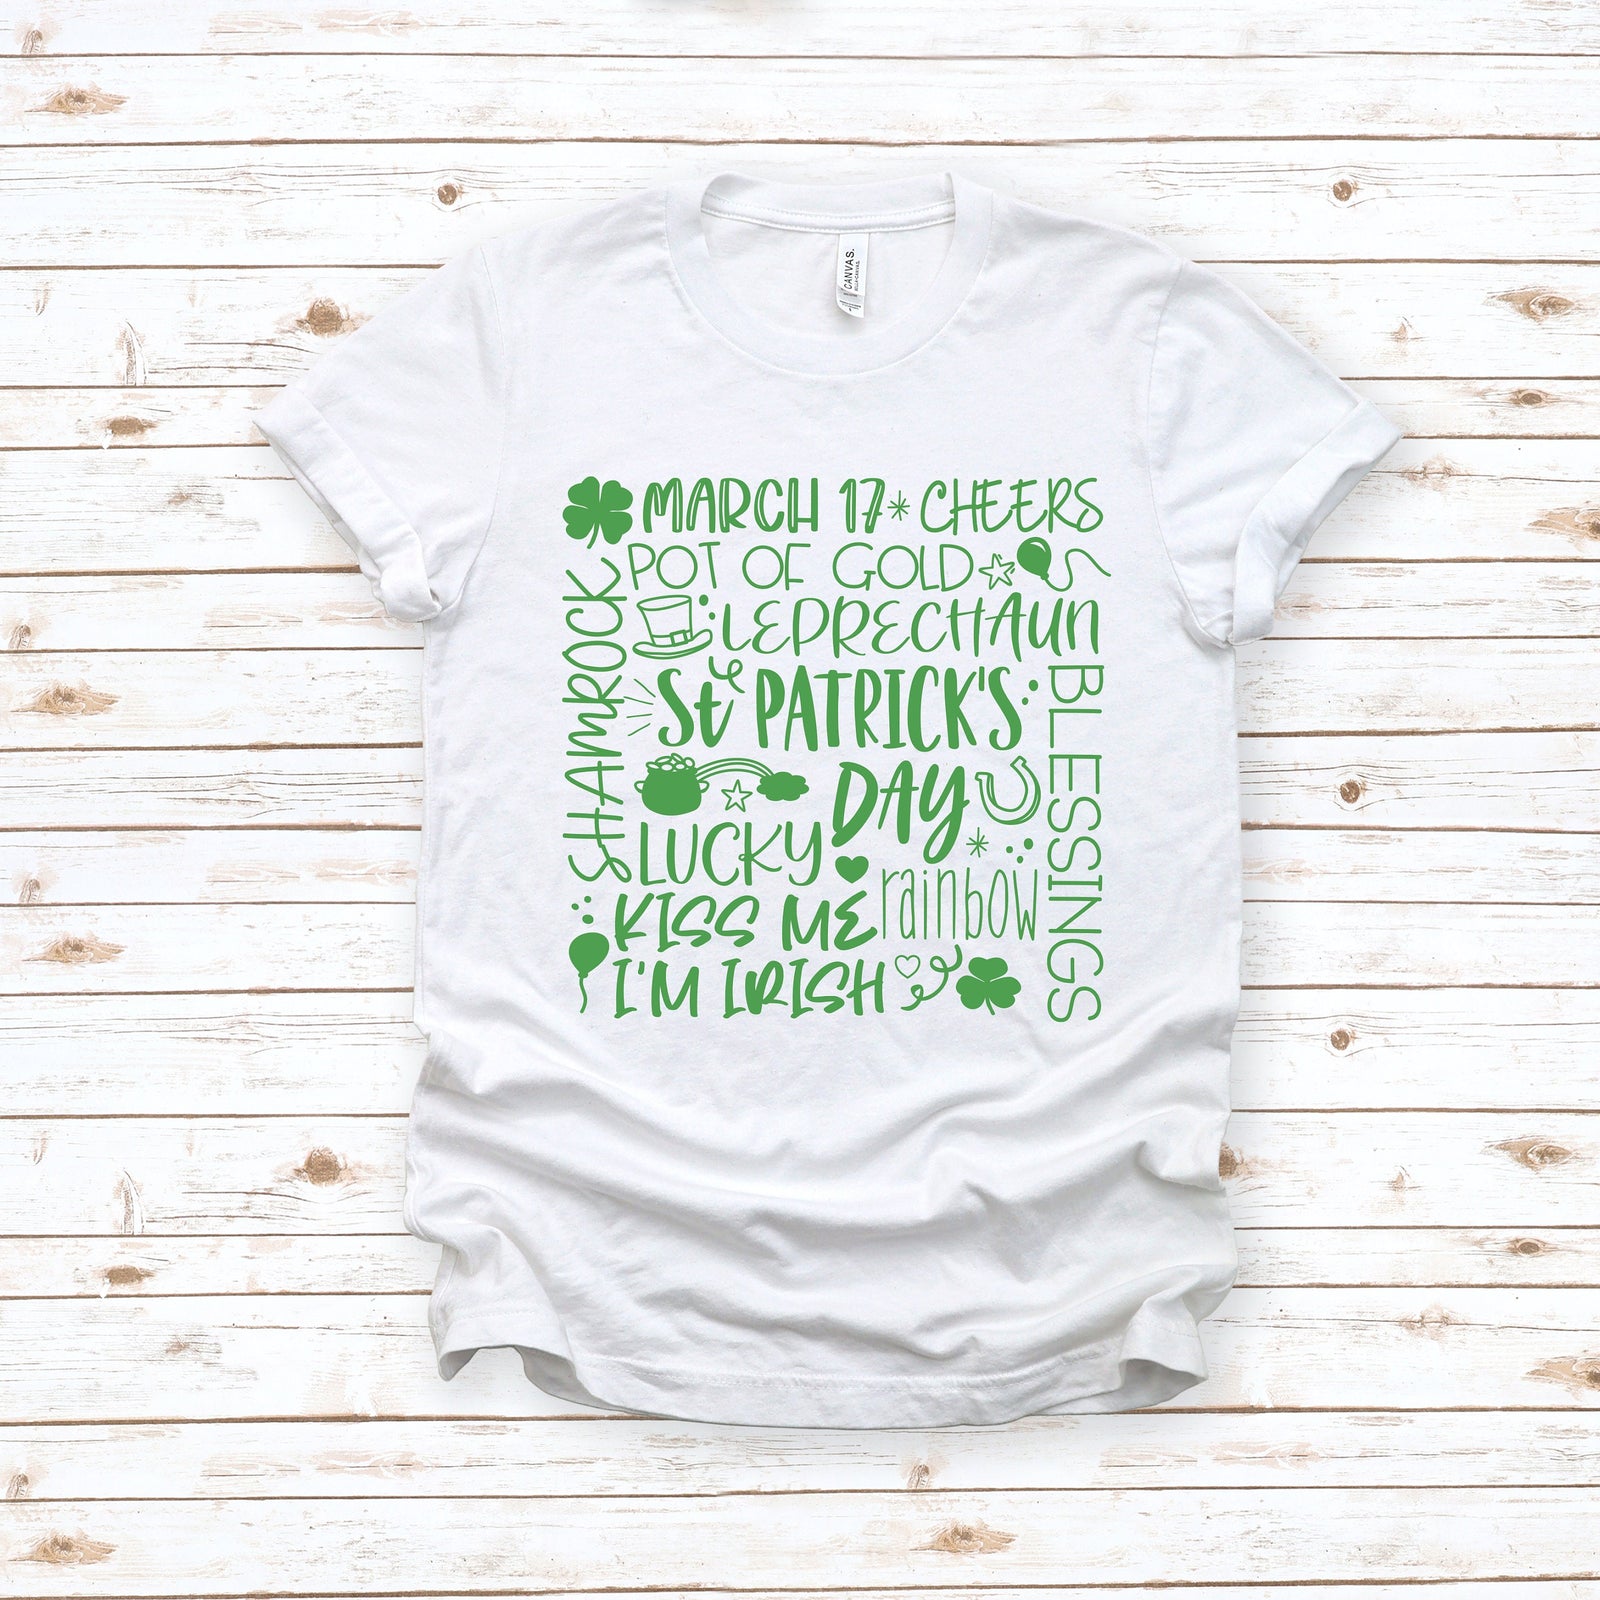 St. Patrick's Day Subway Words Typography Adult T Shirt - St. Patrick's Day Shirt - Lucky - Green